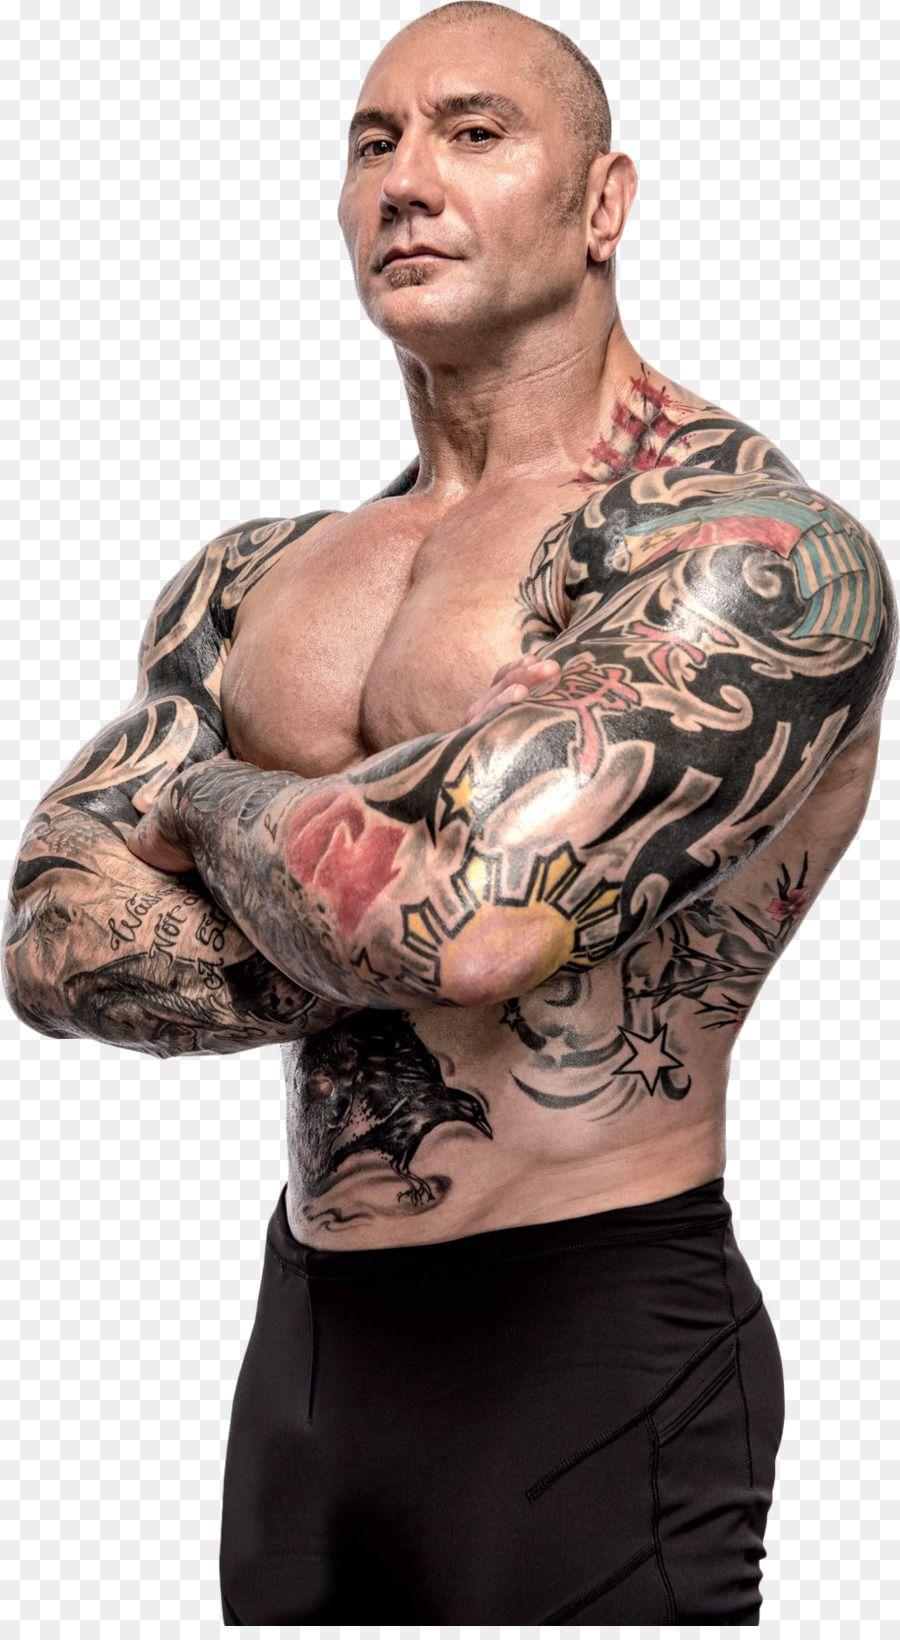 Image result for dave bautista image. hunks in 2018